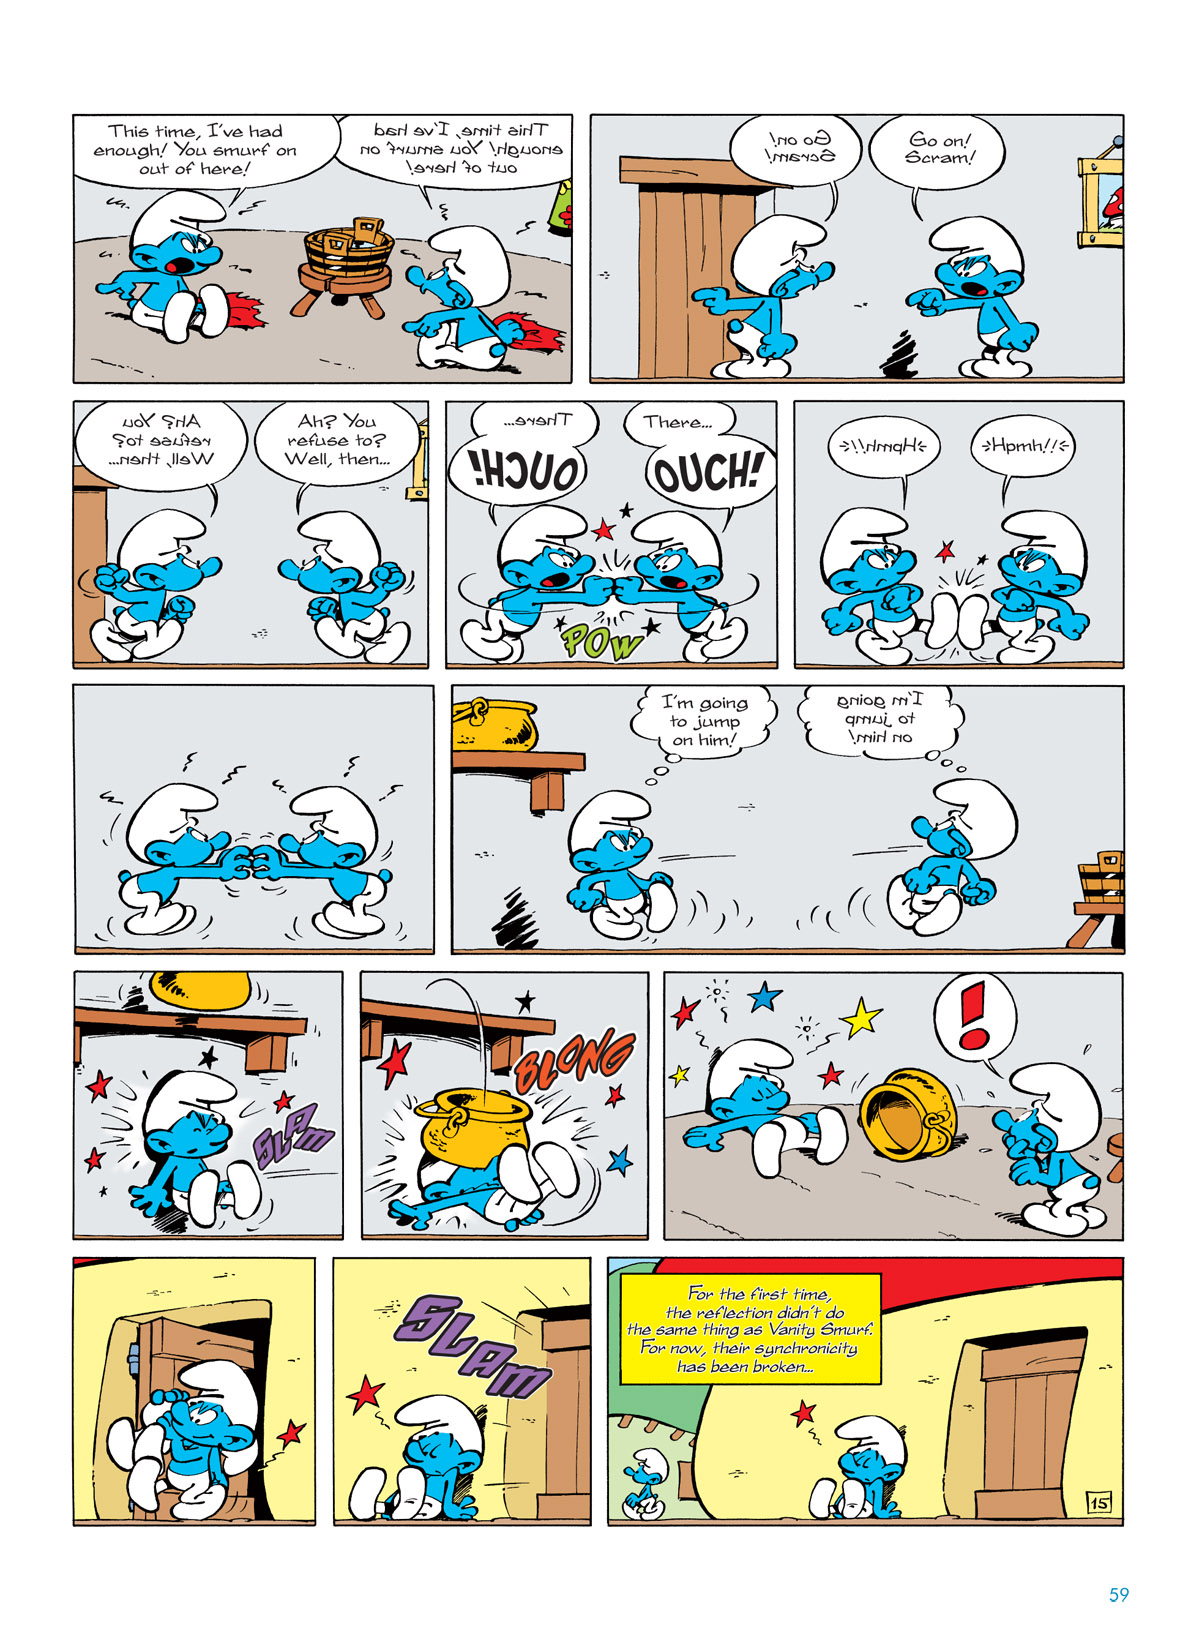 Read online The Smurfs comic -  Issue #5 - 59